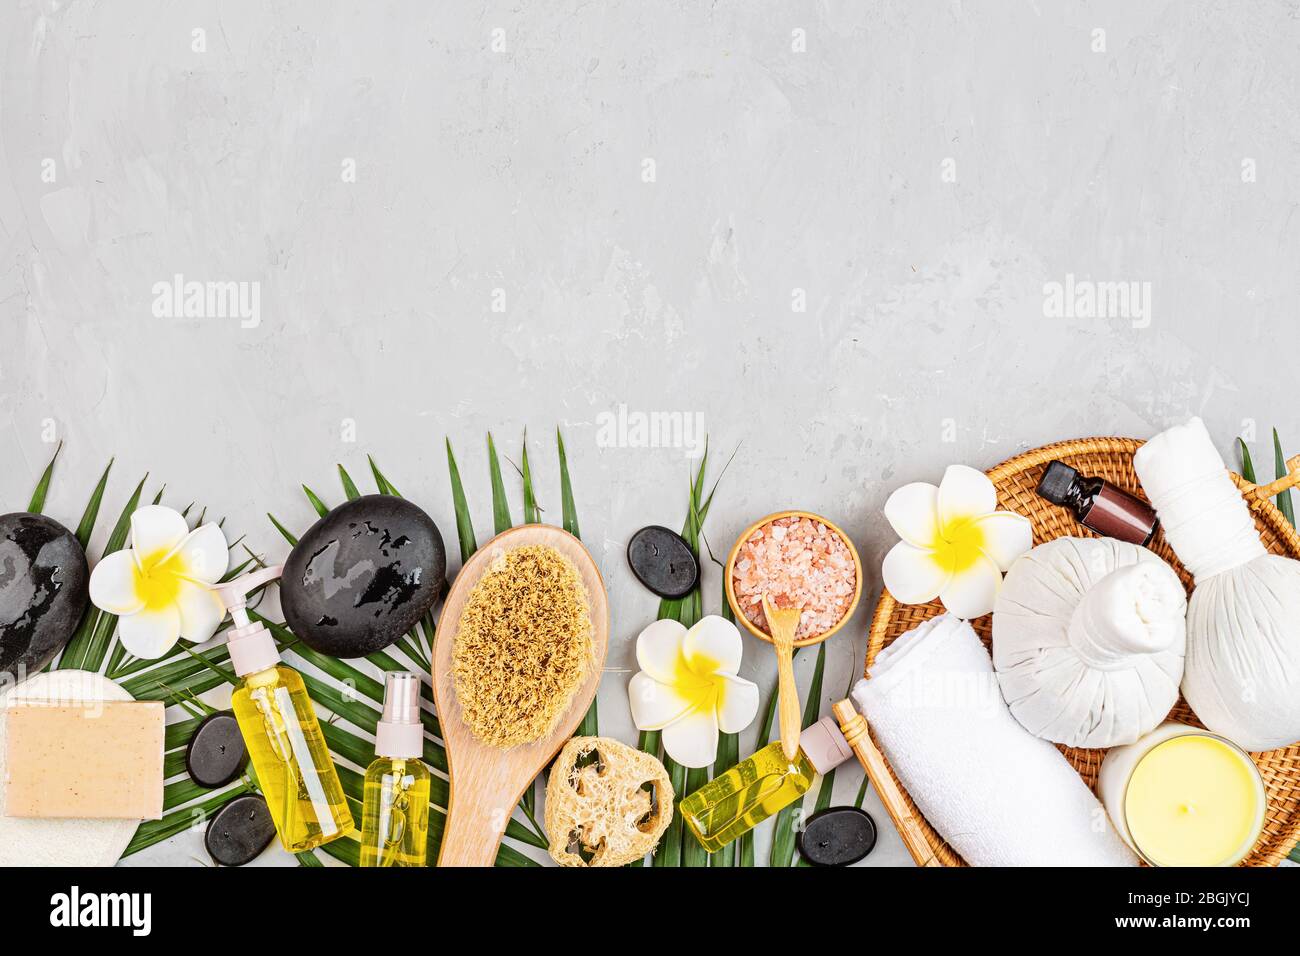 Spa massage Aromatherapy body care background. Spa herbal balls, cosmetics, towel and tropical leaves on gray concrete table. Top view, flat lay Stock Photo